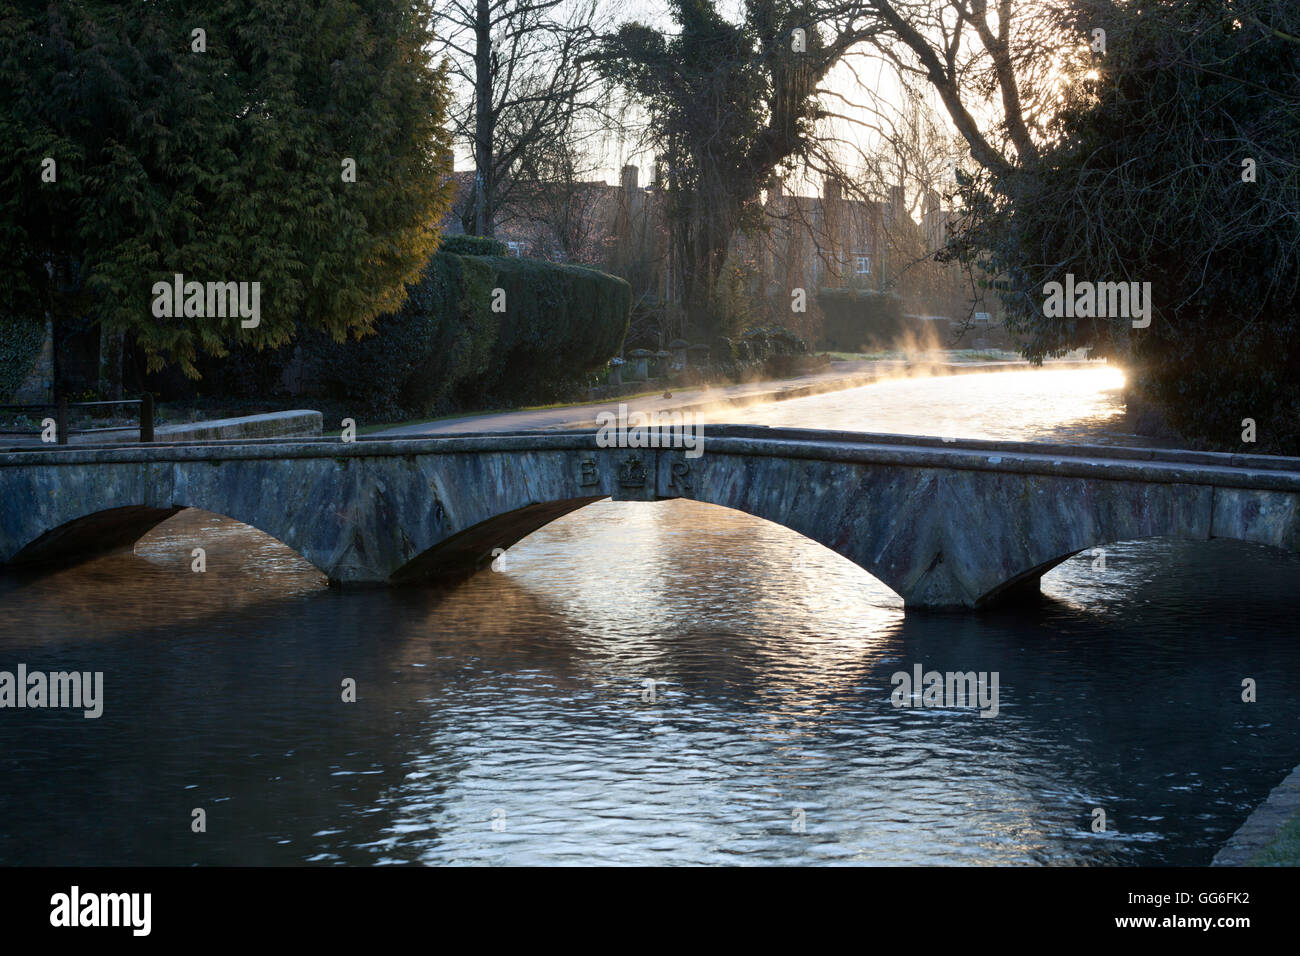 Cotswold stone bridge over River Windrush in mist, Bourton-on-the-Water, Cotswolds, Gloucestershire, England, United Kingdom Stock Photo